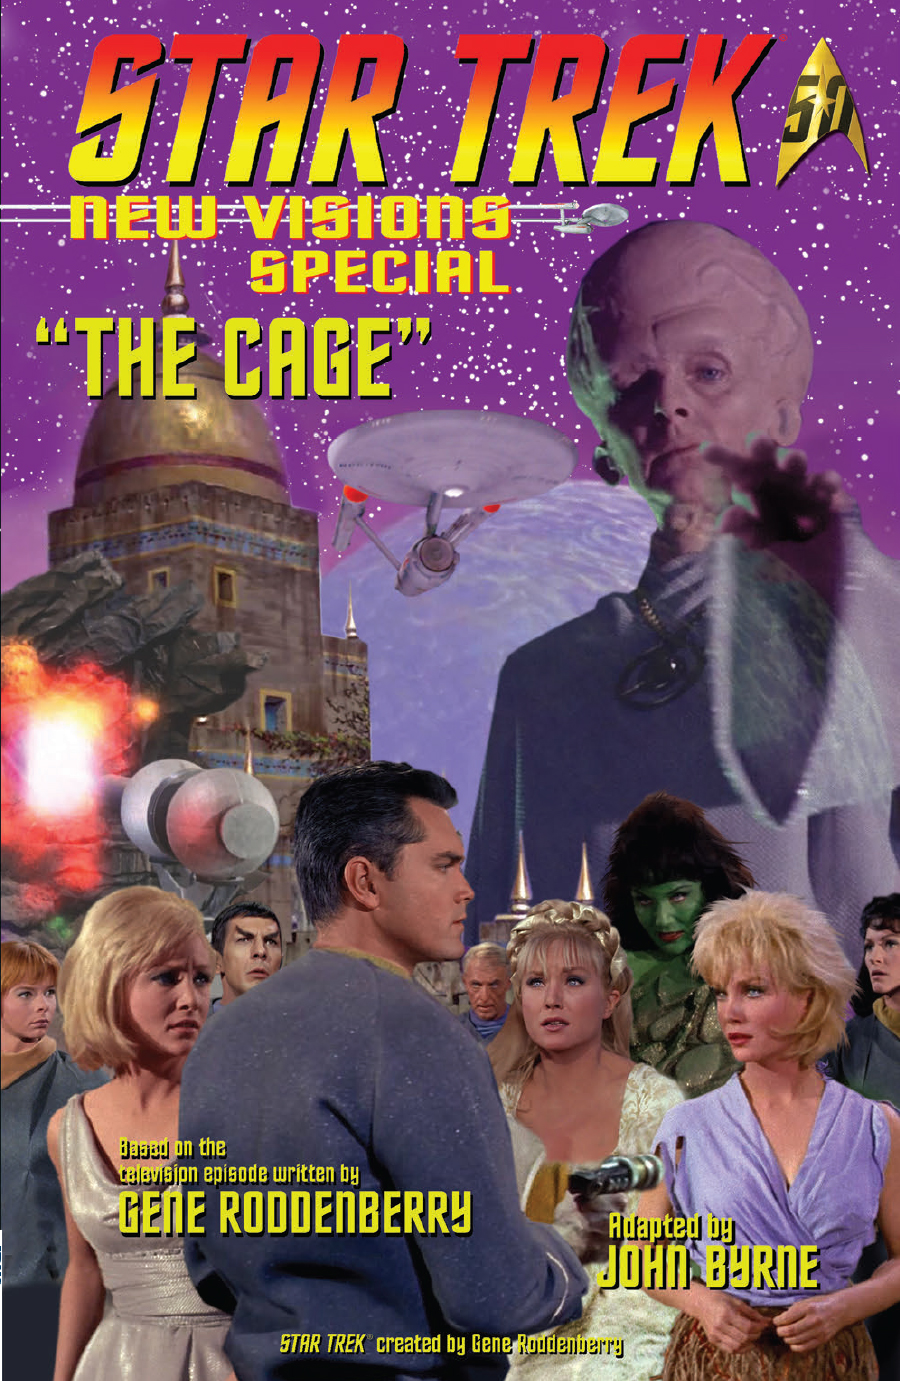 New Visions Special – The Cage